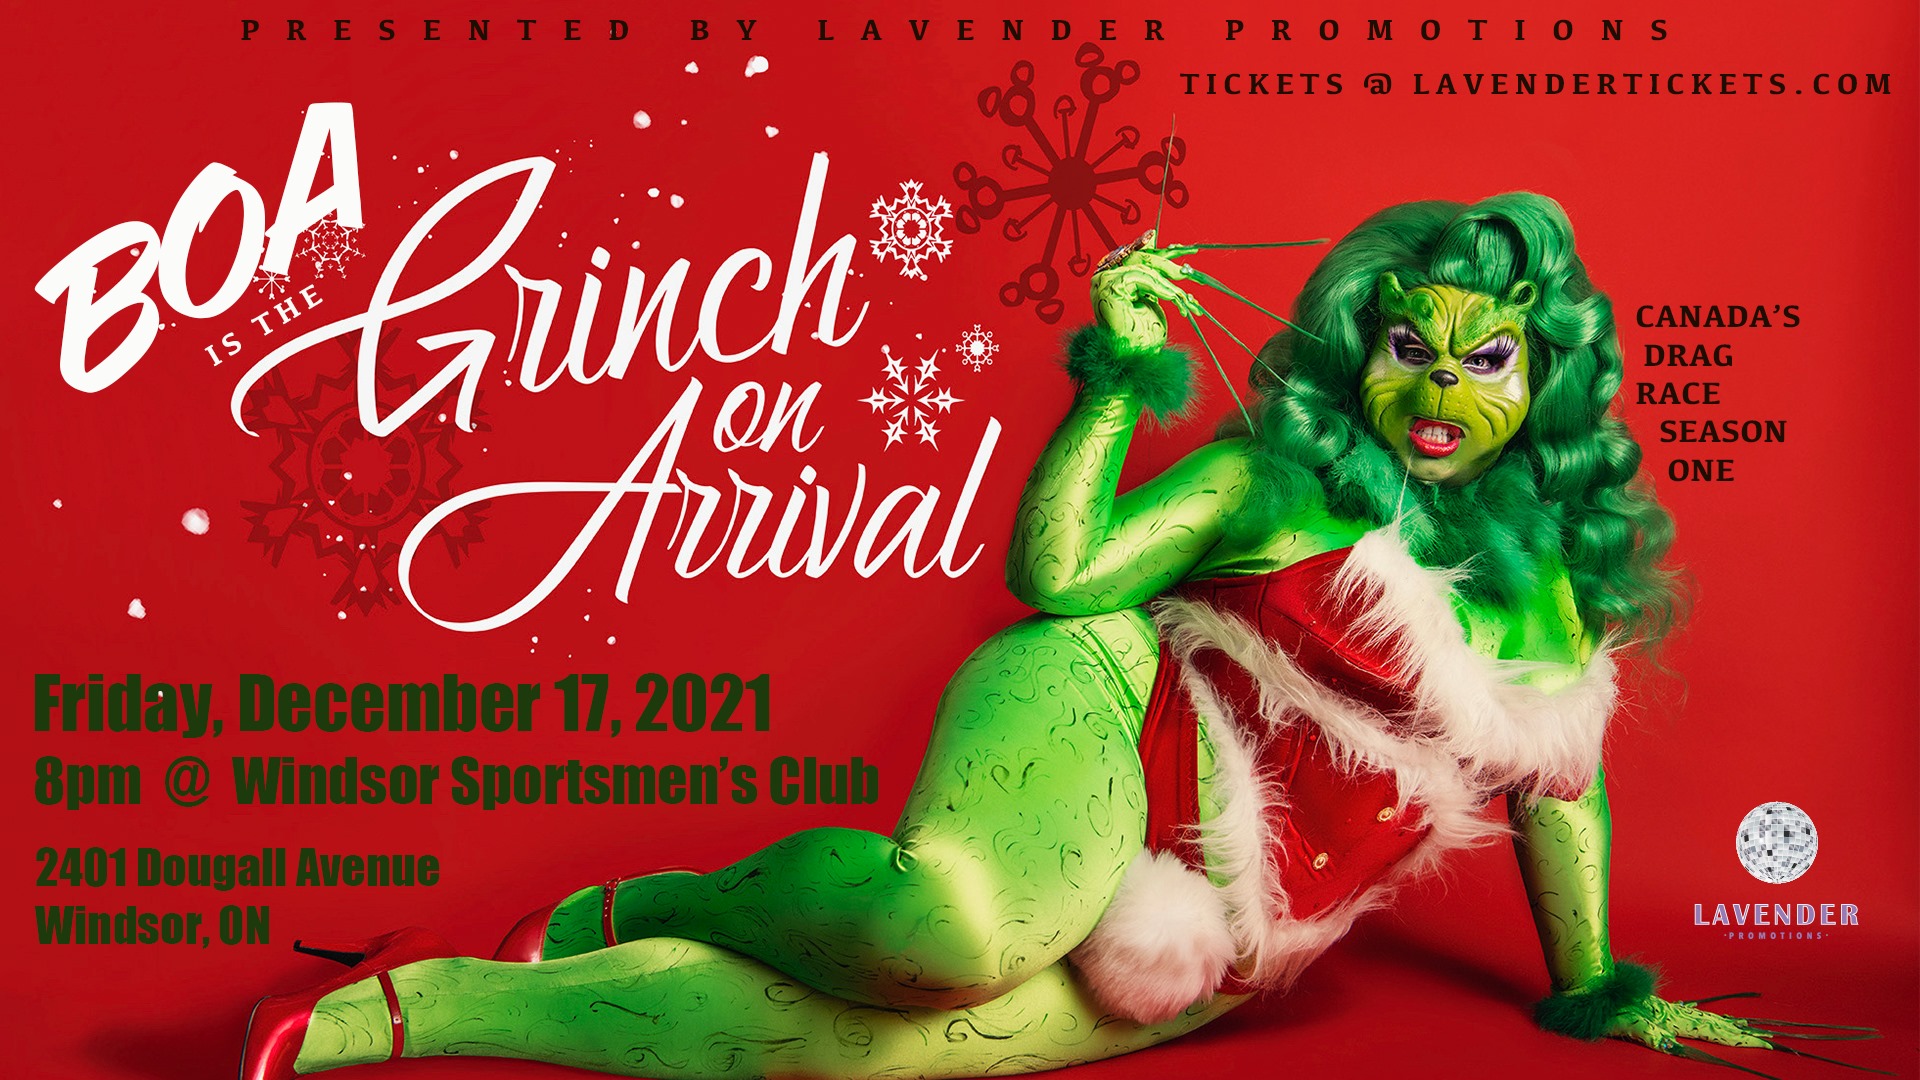 BOA: The Grinch On Arrival